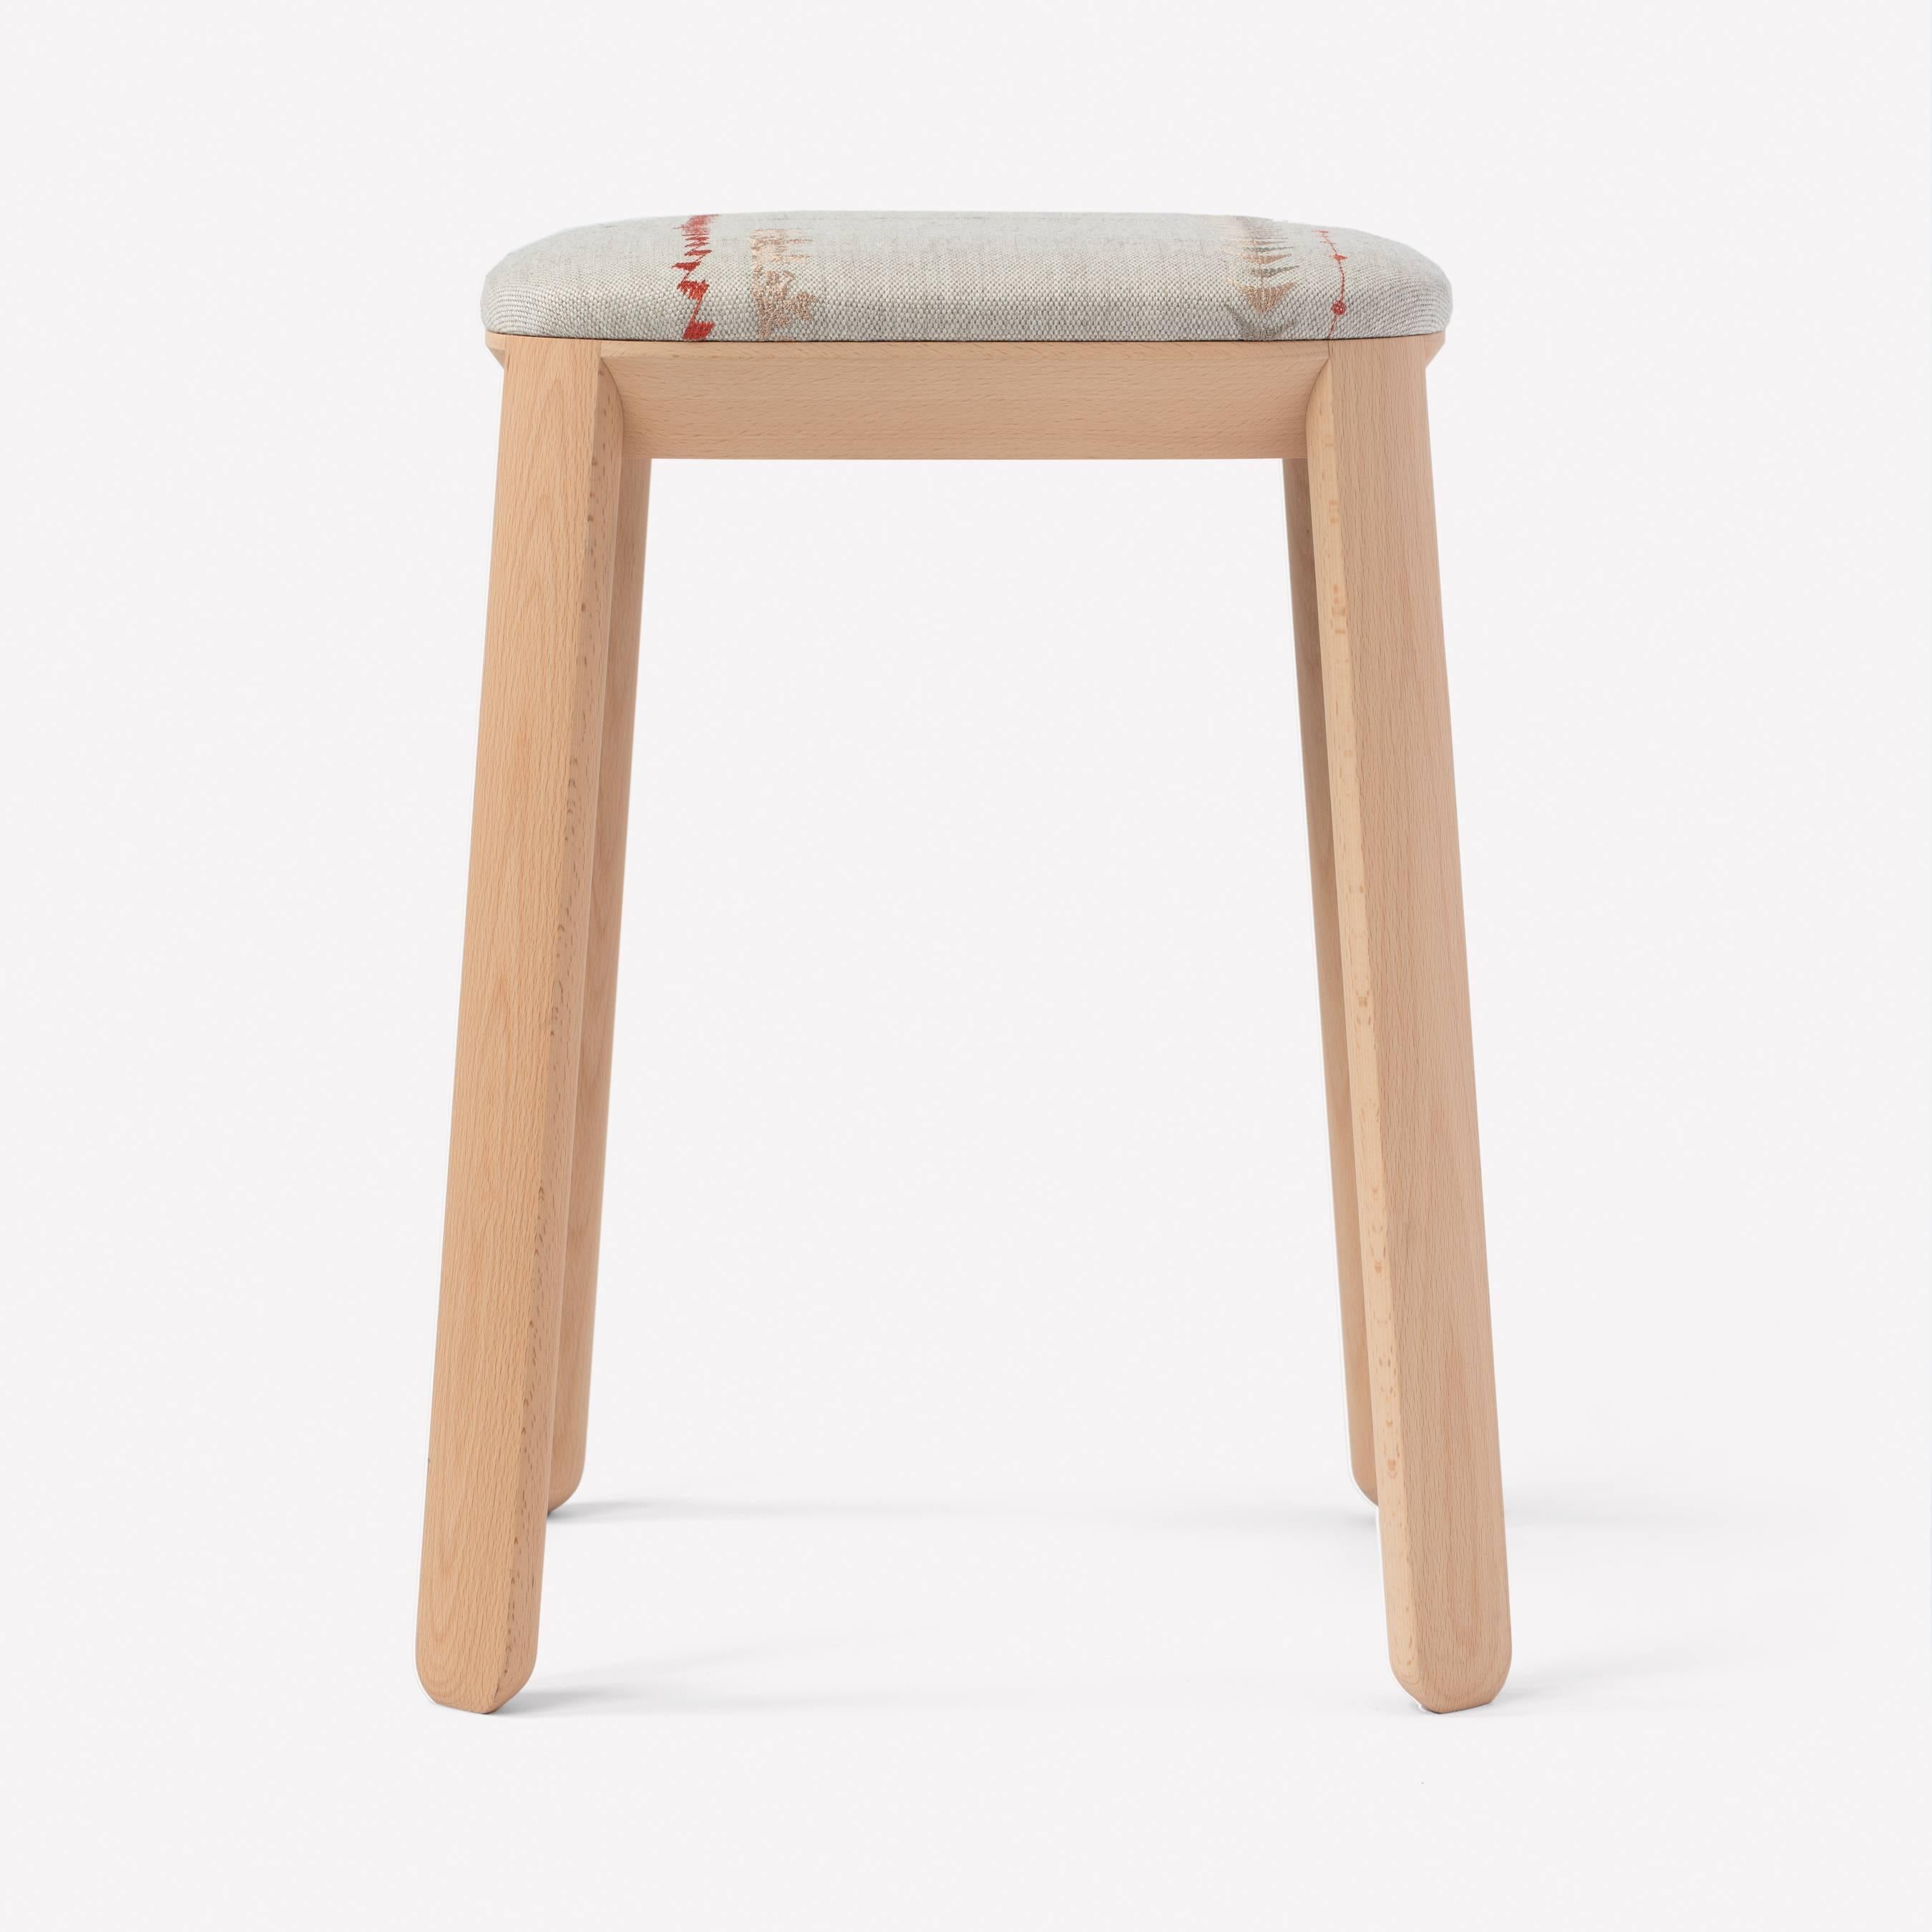 Covered Stool by Scholten & Baijings
Borders by Hella Jongerius
101 Natural

Natural beechwood base with Borders textile. Stackable. Made in Japan by Karimoku New Standard.

Scholten & Baijings for Maharam is a collection of home goods and